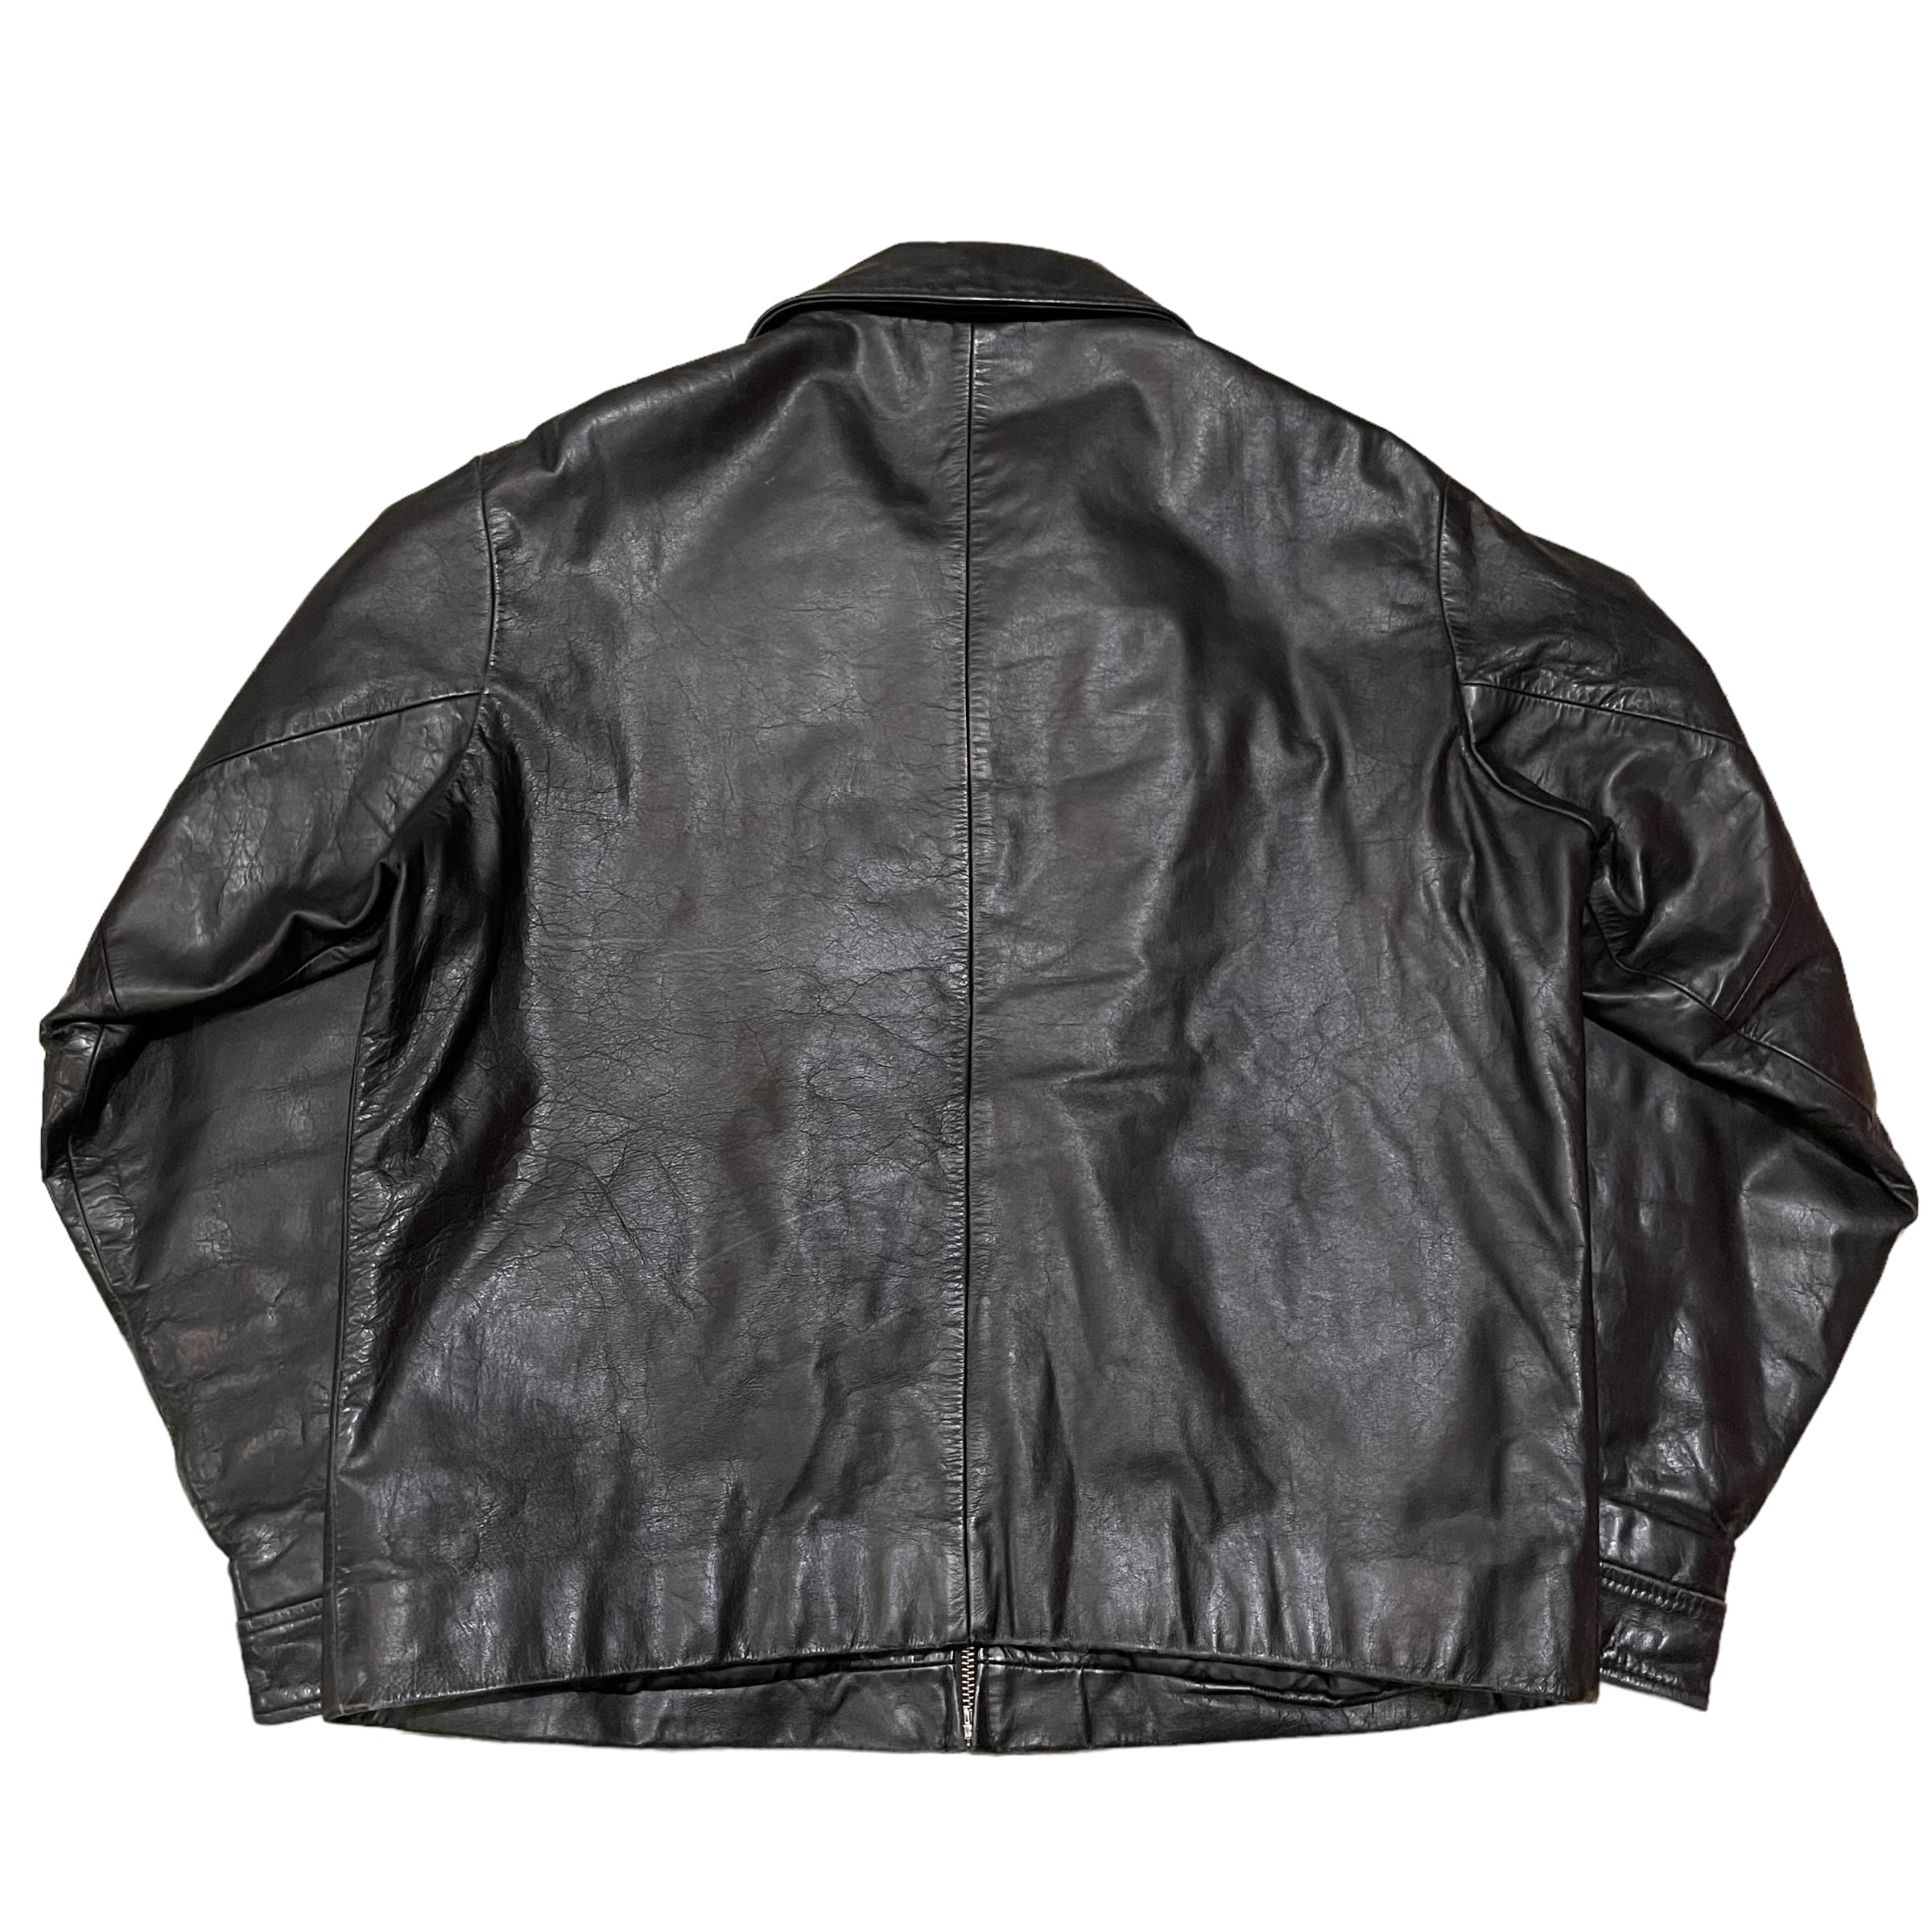 00s archive switching leather bordervest